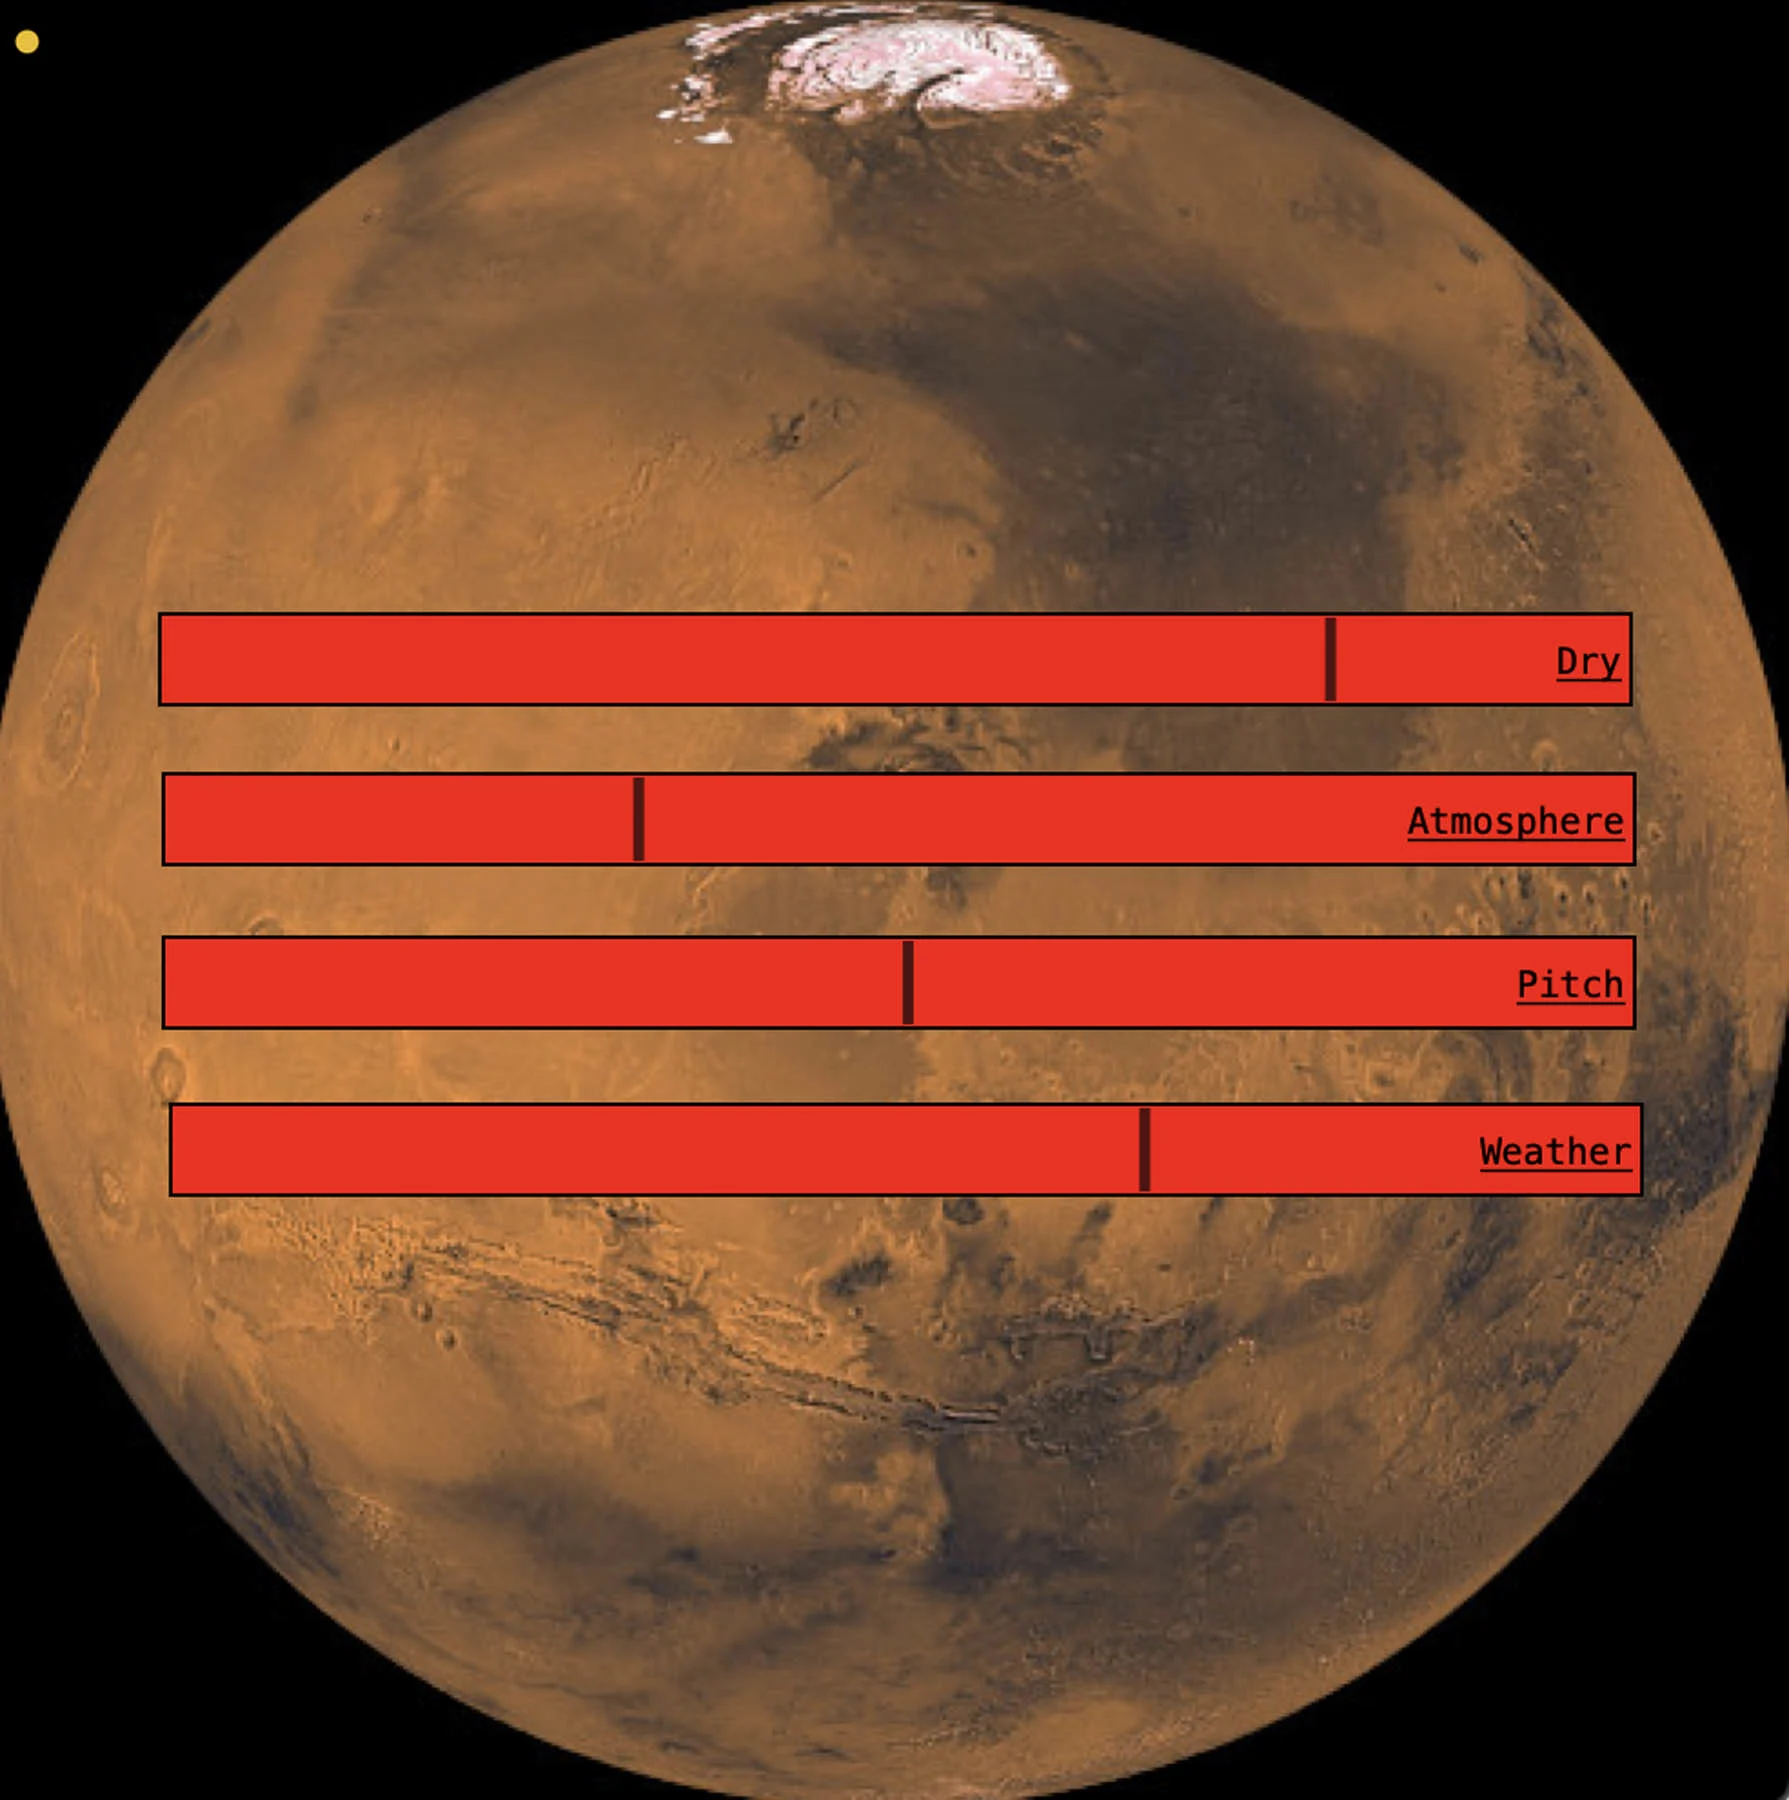 A screenshot of the Mars VST plug-in. The plug-in is made up of a photo of Mars. There are four long red rectangles overlaid in the centre of the photograph, with a word in each one: Dry, Atmosphere, Pitch, Weather.